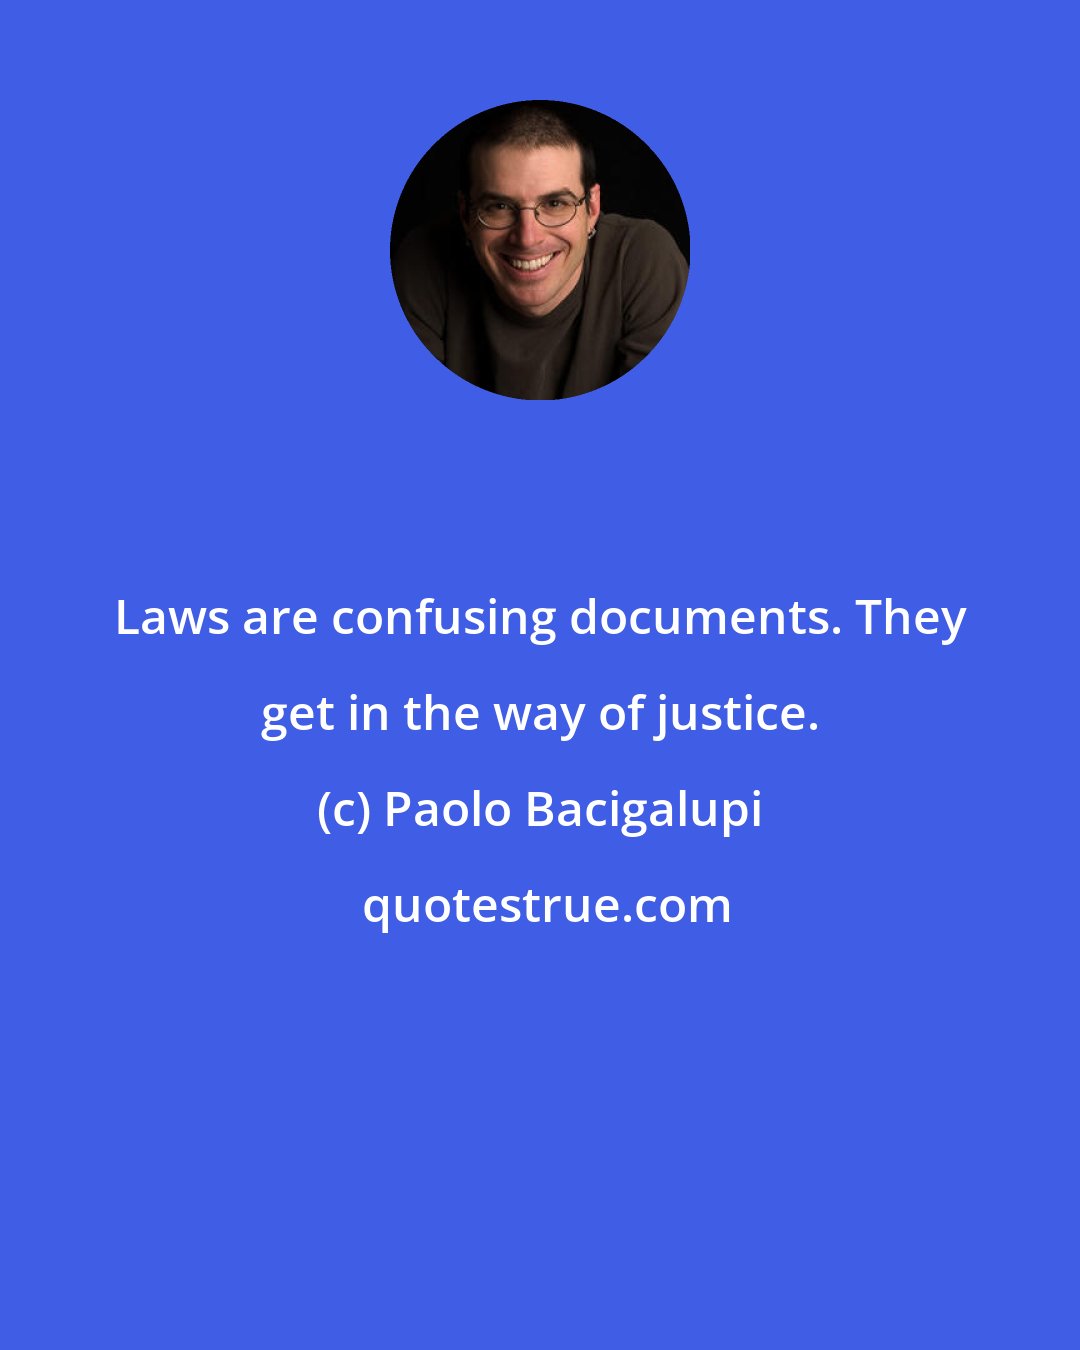 Paolo Bacigalupi: Laws are confusing documents. They get in the way of justice.